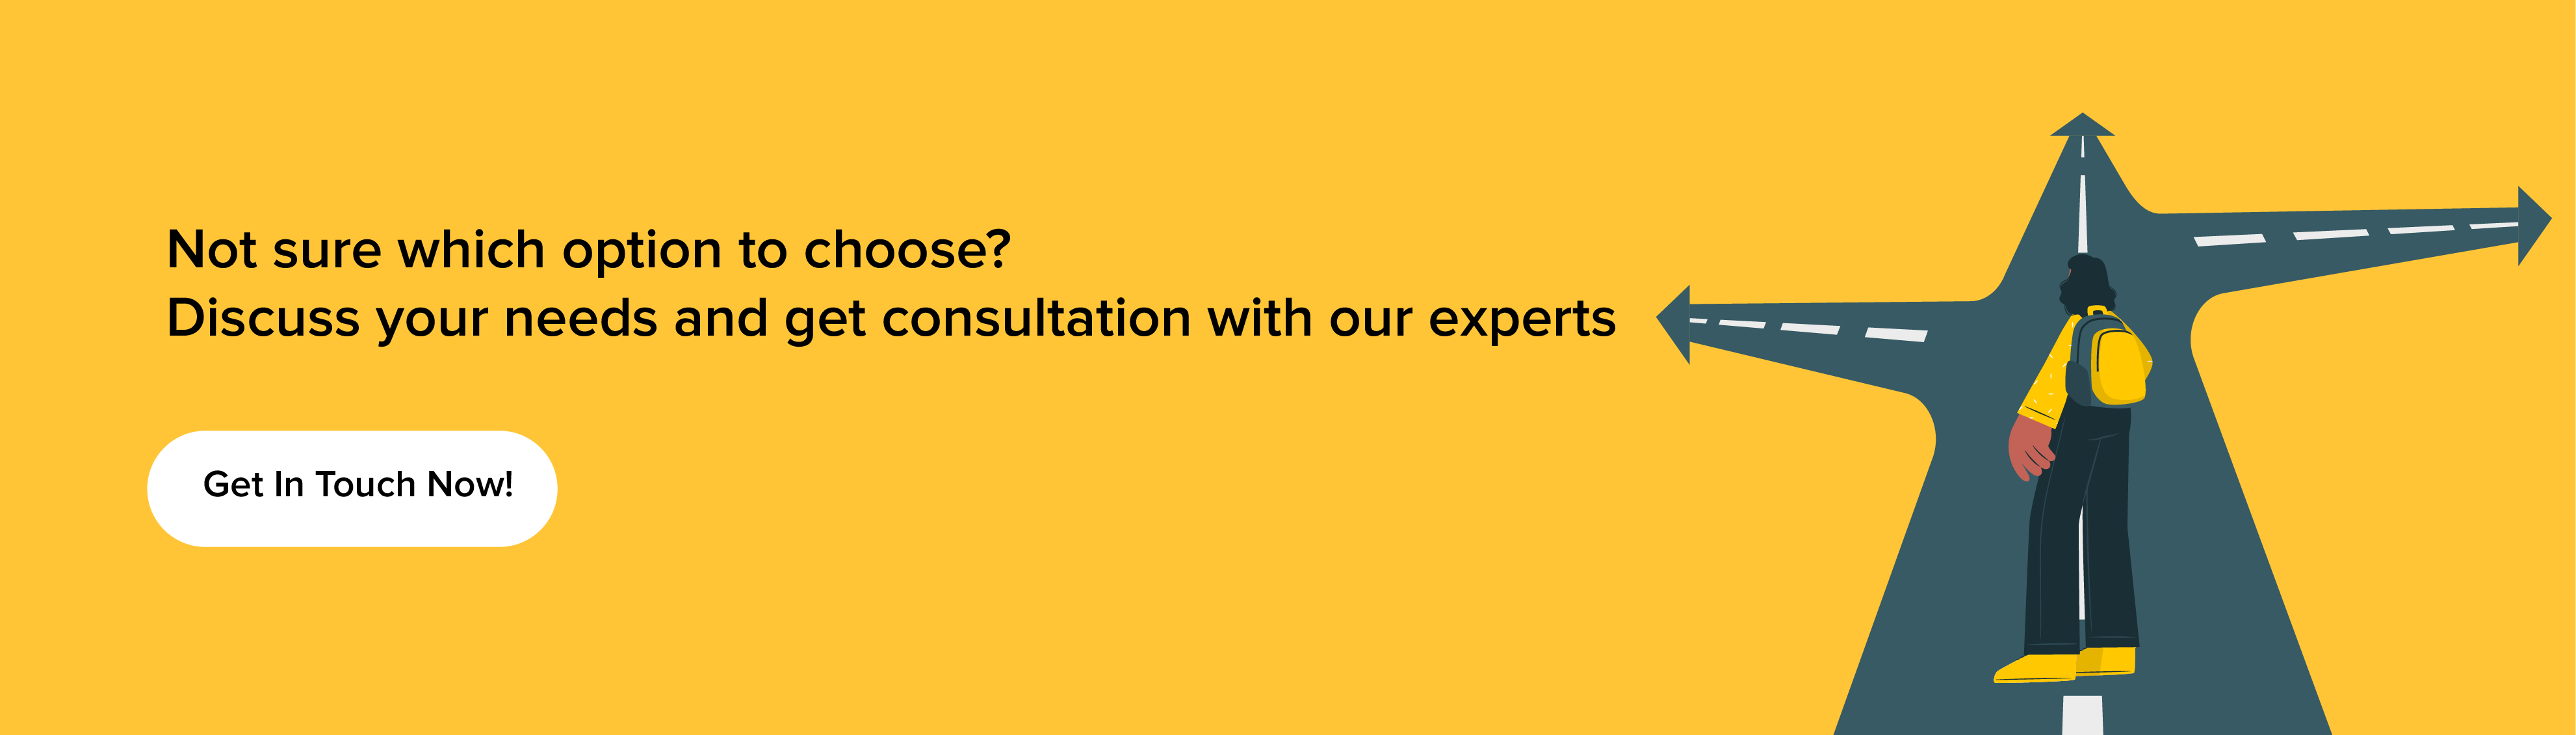 contact our expert